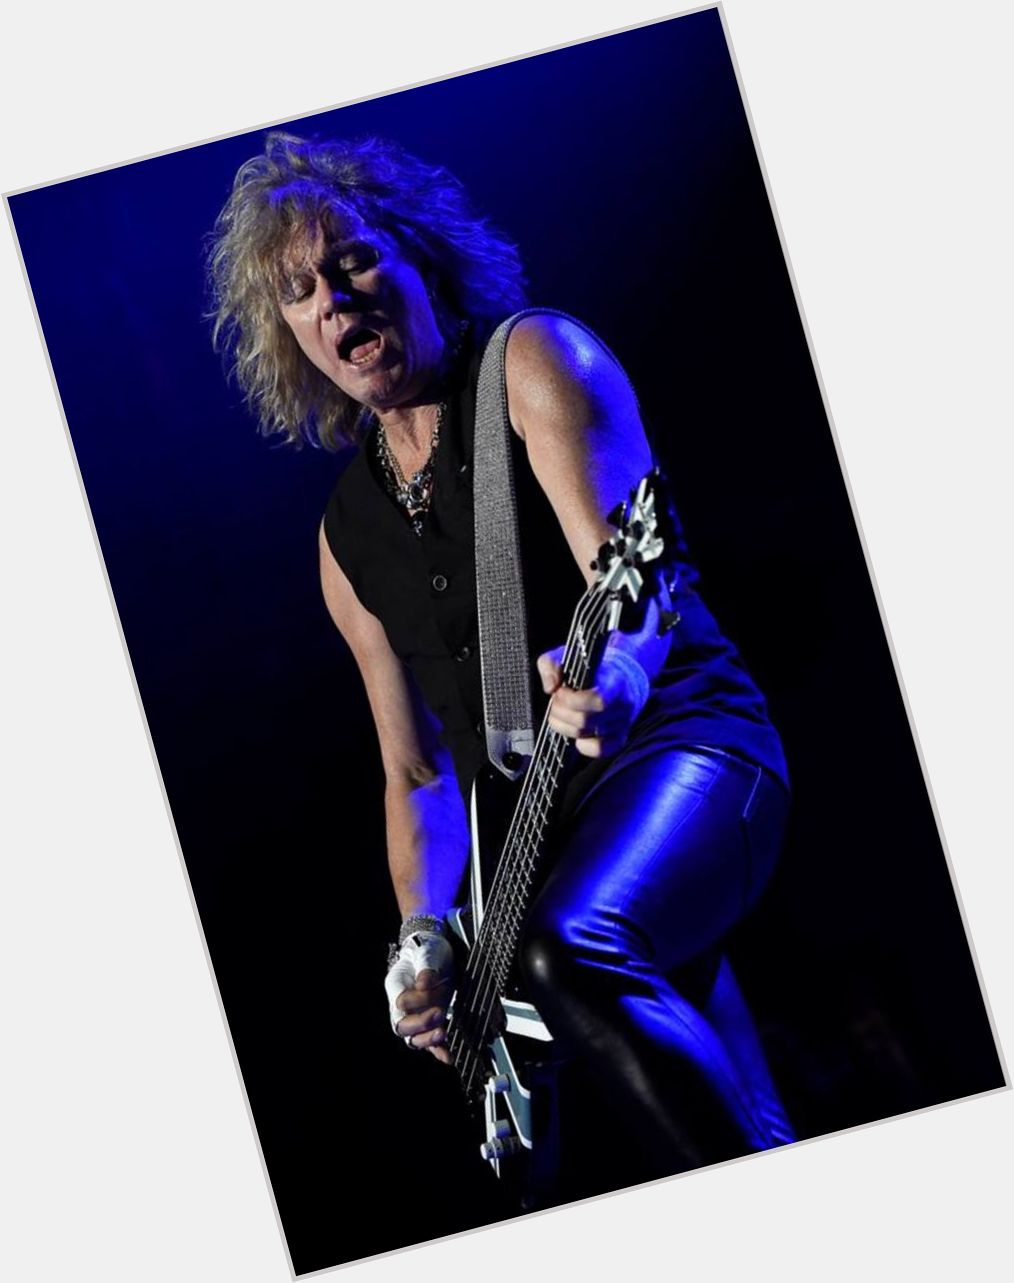 Happy Birthday Rick Savage (Def Leppard), December 2, 1960 - Another Hit and Run . . . 